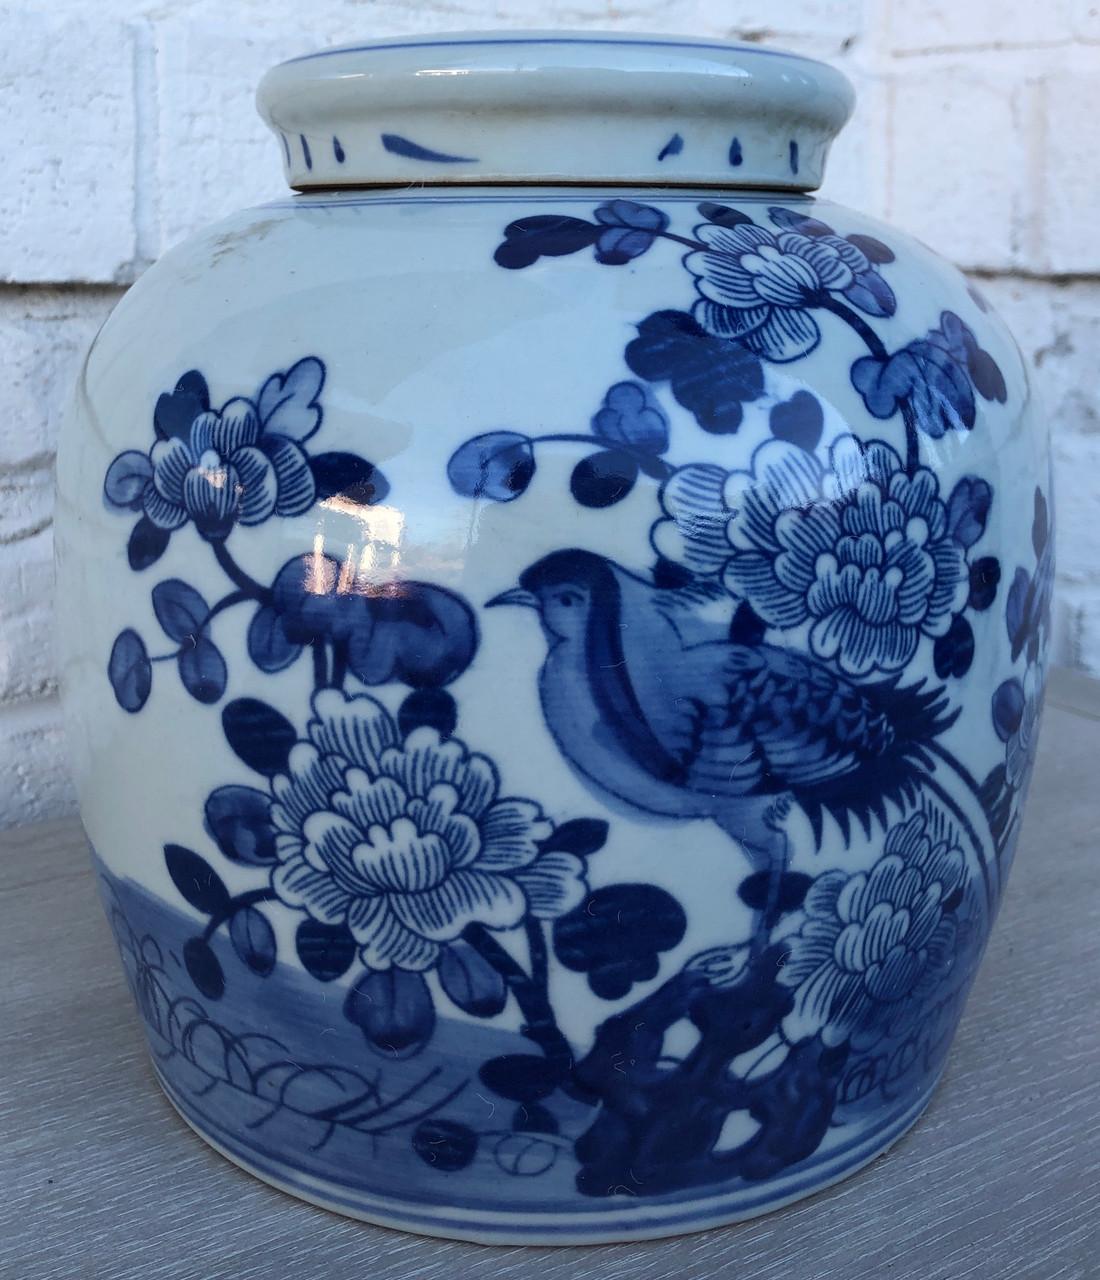 Handmade blue and white porcelain lidded jar with an antique finish. Inspired by the pottery of ancient Chinese empires, this jar will make a dramatic feature when displayed as a centerpiece or on a console table. Painted with flourishing flowers